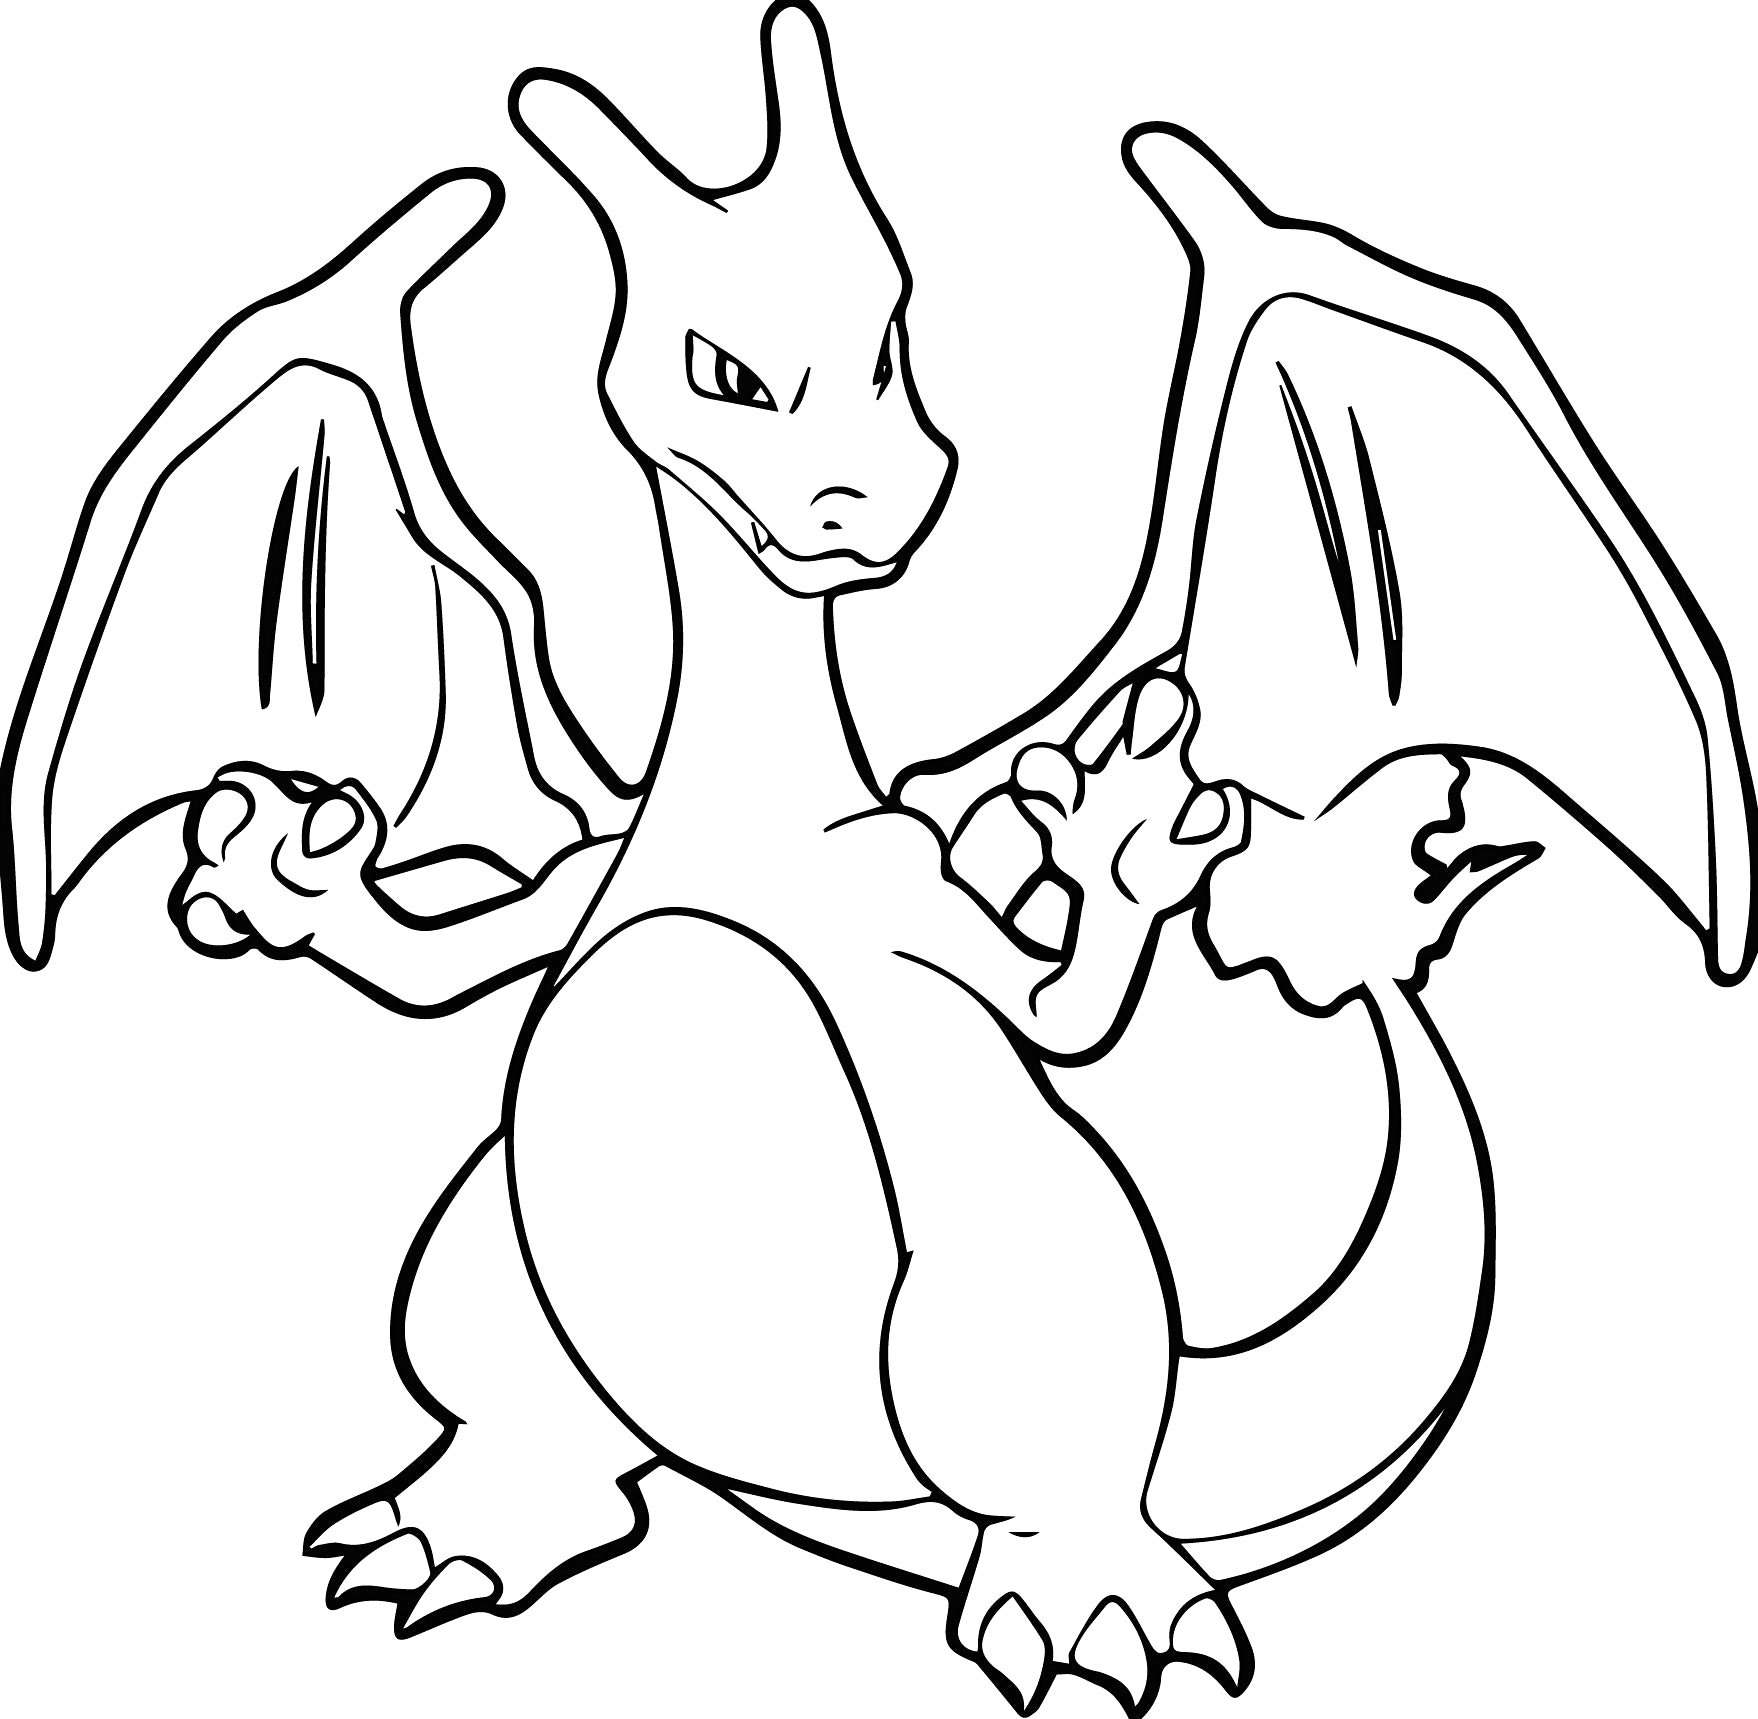 Printable Charizard Coloring Pages - Coloring Pages Charizard